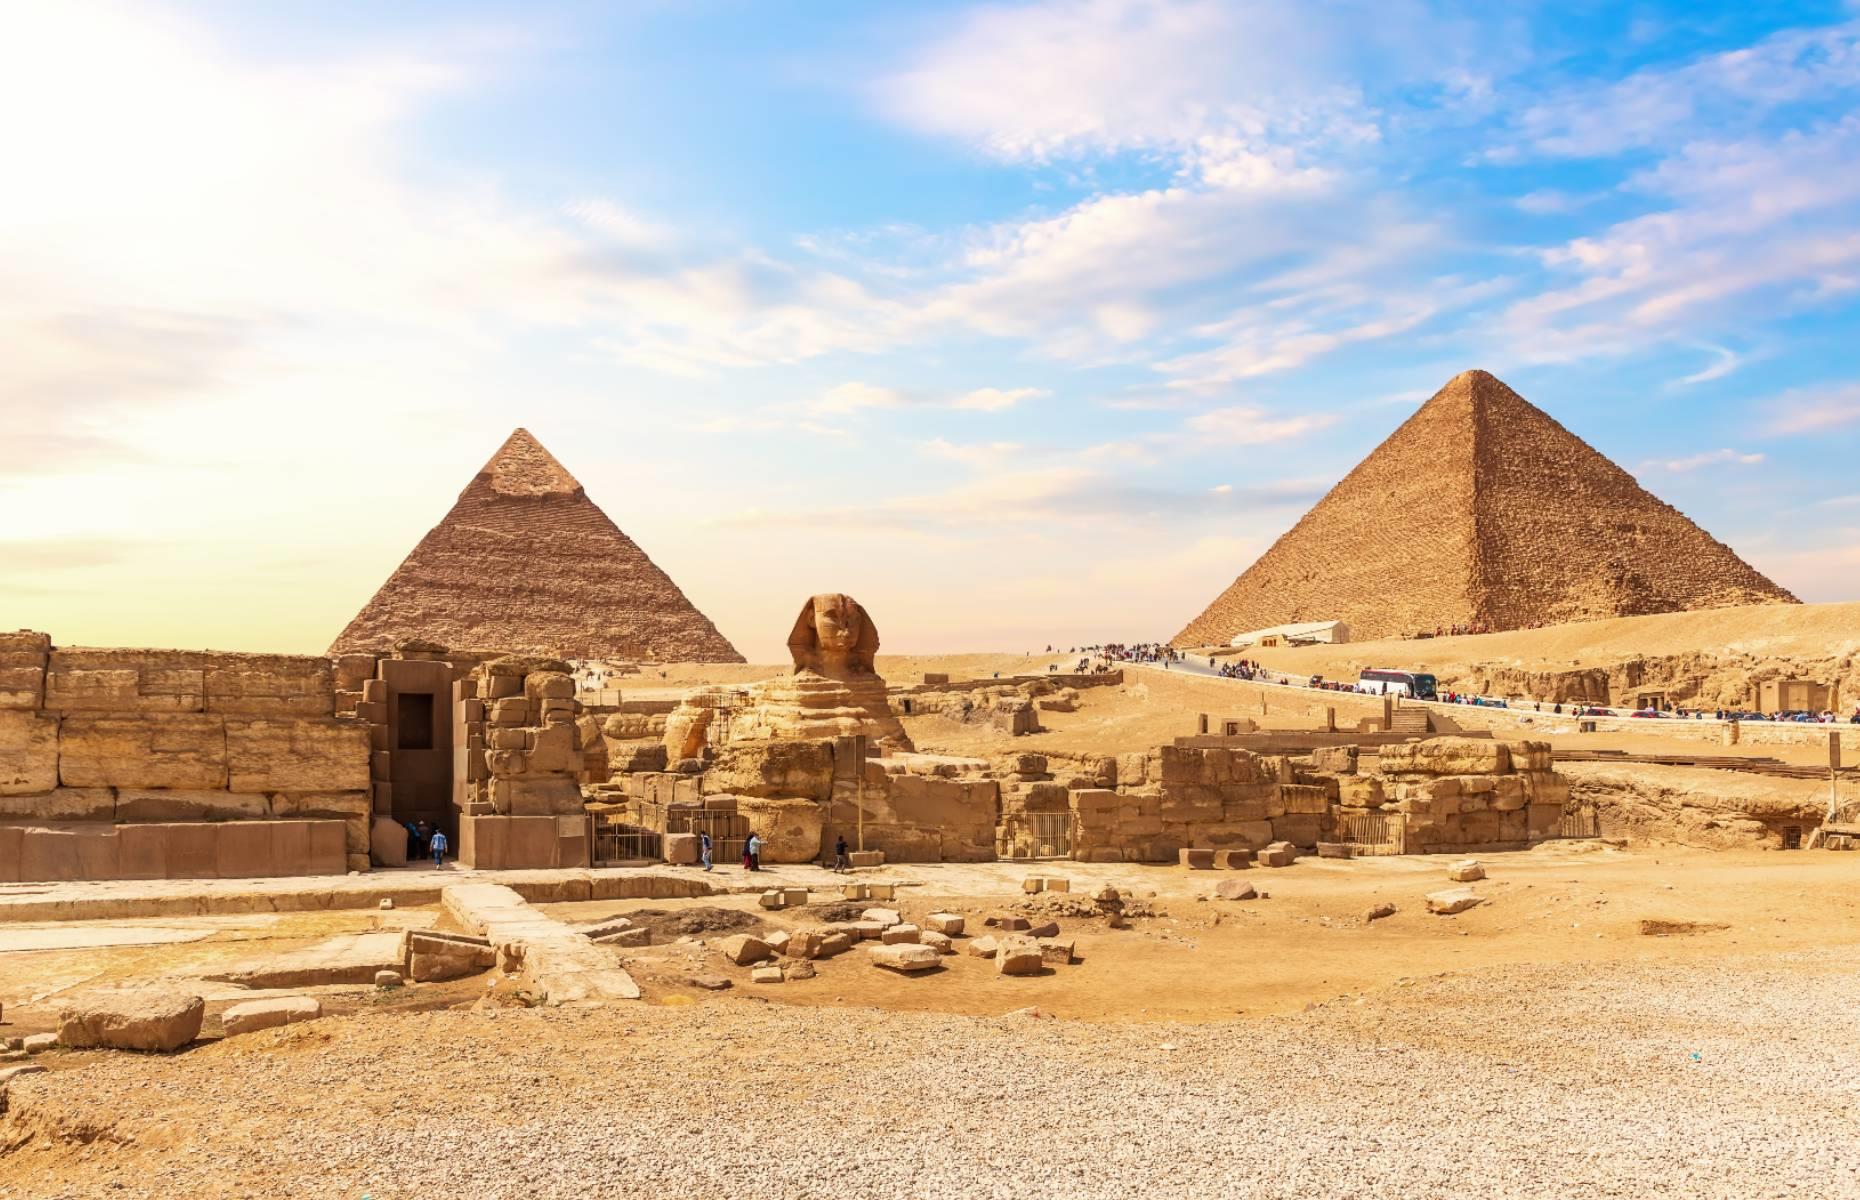 <p>Three mighty pyramids can be found at the site of Giza in northern Egypt. The largest, the Great Pyramid, originally stood at 482 feet (147m) and was constructed by King Khufu between 2550 and 2490 BC, using a whopping 2.3 million stone blocks. Khafre is the second largest and was built by King Khafre (2558-2532 BC), Khufu’s son – it’s widely believed that the Sphinx standing outside was built for Khafre too. Finally there’s Menkaure, standing at just 213 feet (65m) tall, which was completed in the 26th century BC. </p>  <p><a href="https://www.loveexploring.com/galleries/127144/secrets-of-the-pharaohs-inside-egypts-pyramids?page=1"><strong>These are the most amazing secrets hidden inside Egypt's pyramids</strong></a></p>